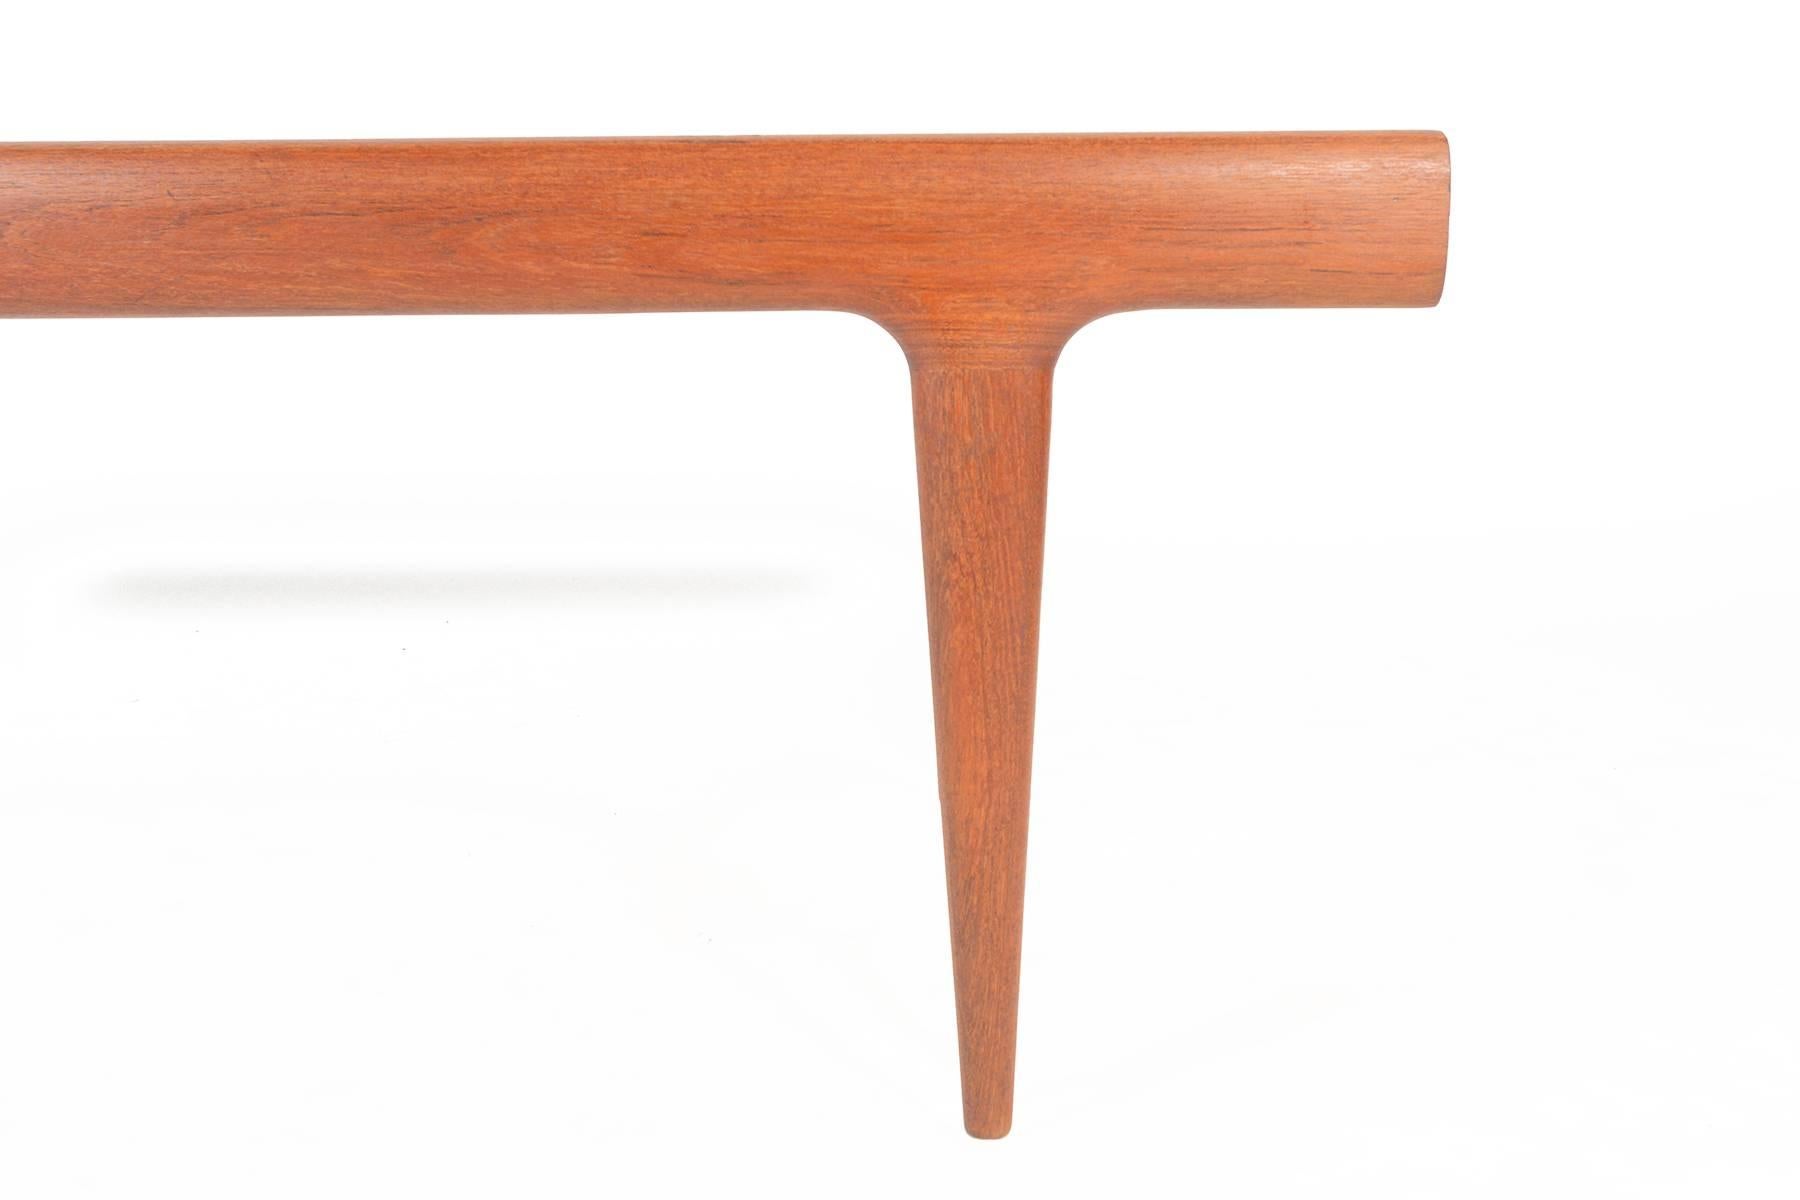 This Danish Modern Mid-Century coffee table in teak was designed by Johannes Andersen for Uldum Møbelfabrik in the 1960s. Expertly built, this gorgeous piece features solid teak legs which are seamlessly joined to the tabletop. A pull-out storage